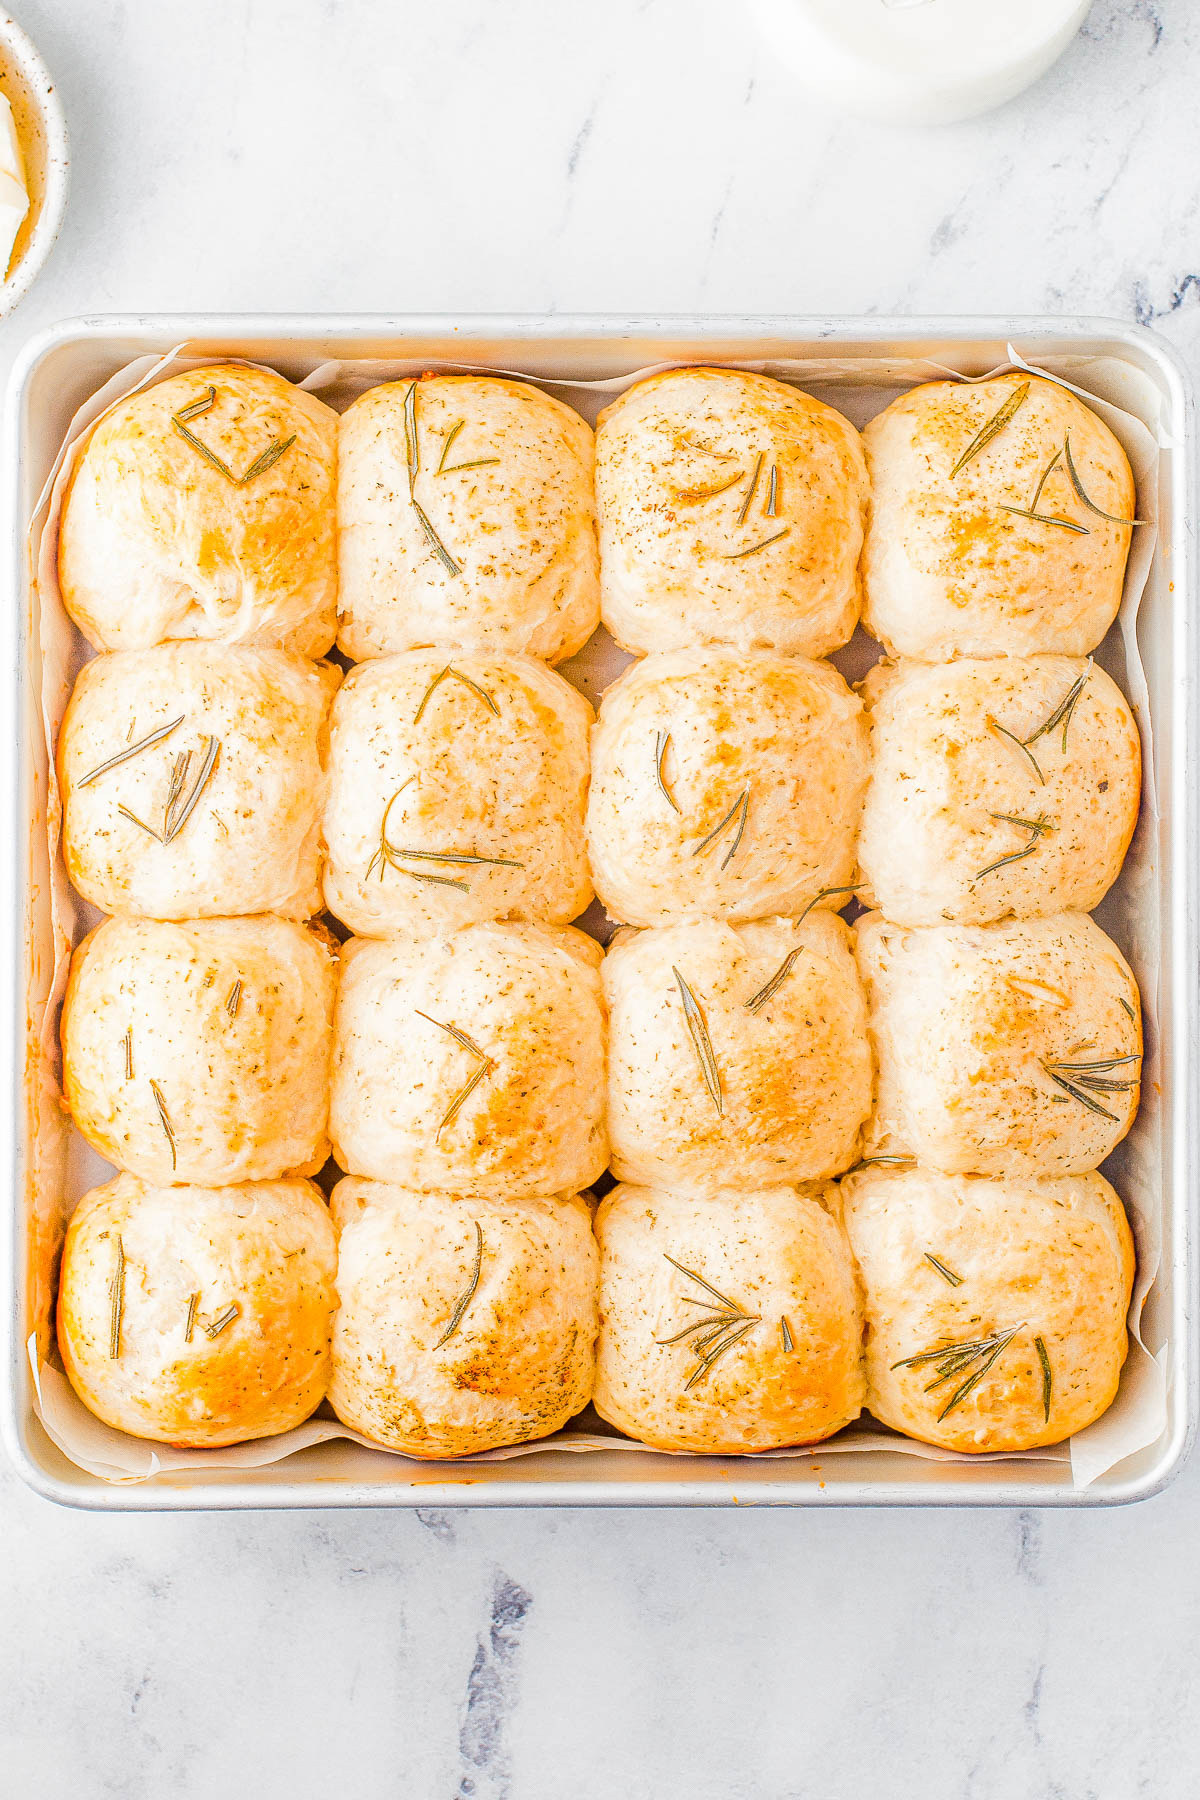 Garlic Herb Rolls - Indulge in the perfect holiday side dish with a basket of homemade garlic and herb rolls! Made with plenty of garlic, fresh rosemary and herbs, these soft dinner rolls are a must-have for family dinners or celebration meals like Thanksgiving and Christmas. Even if you've never made homemade dinner rolls, don't worry because I explain it all and walk you through the steps, and make it EASY for you to master homemade rolls!